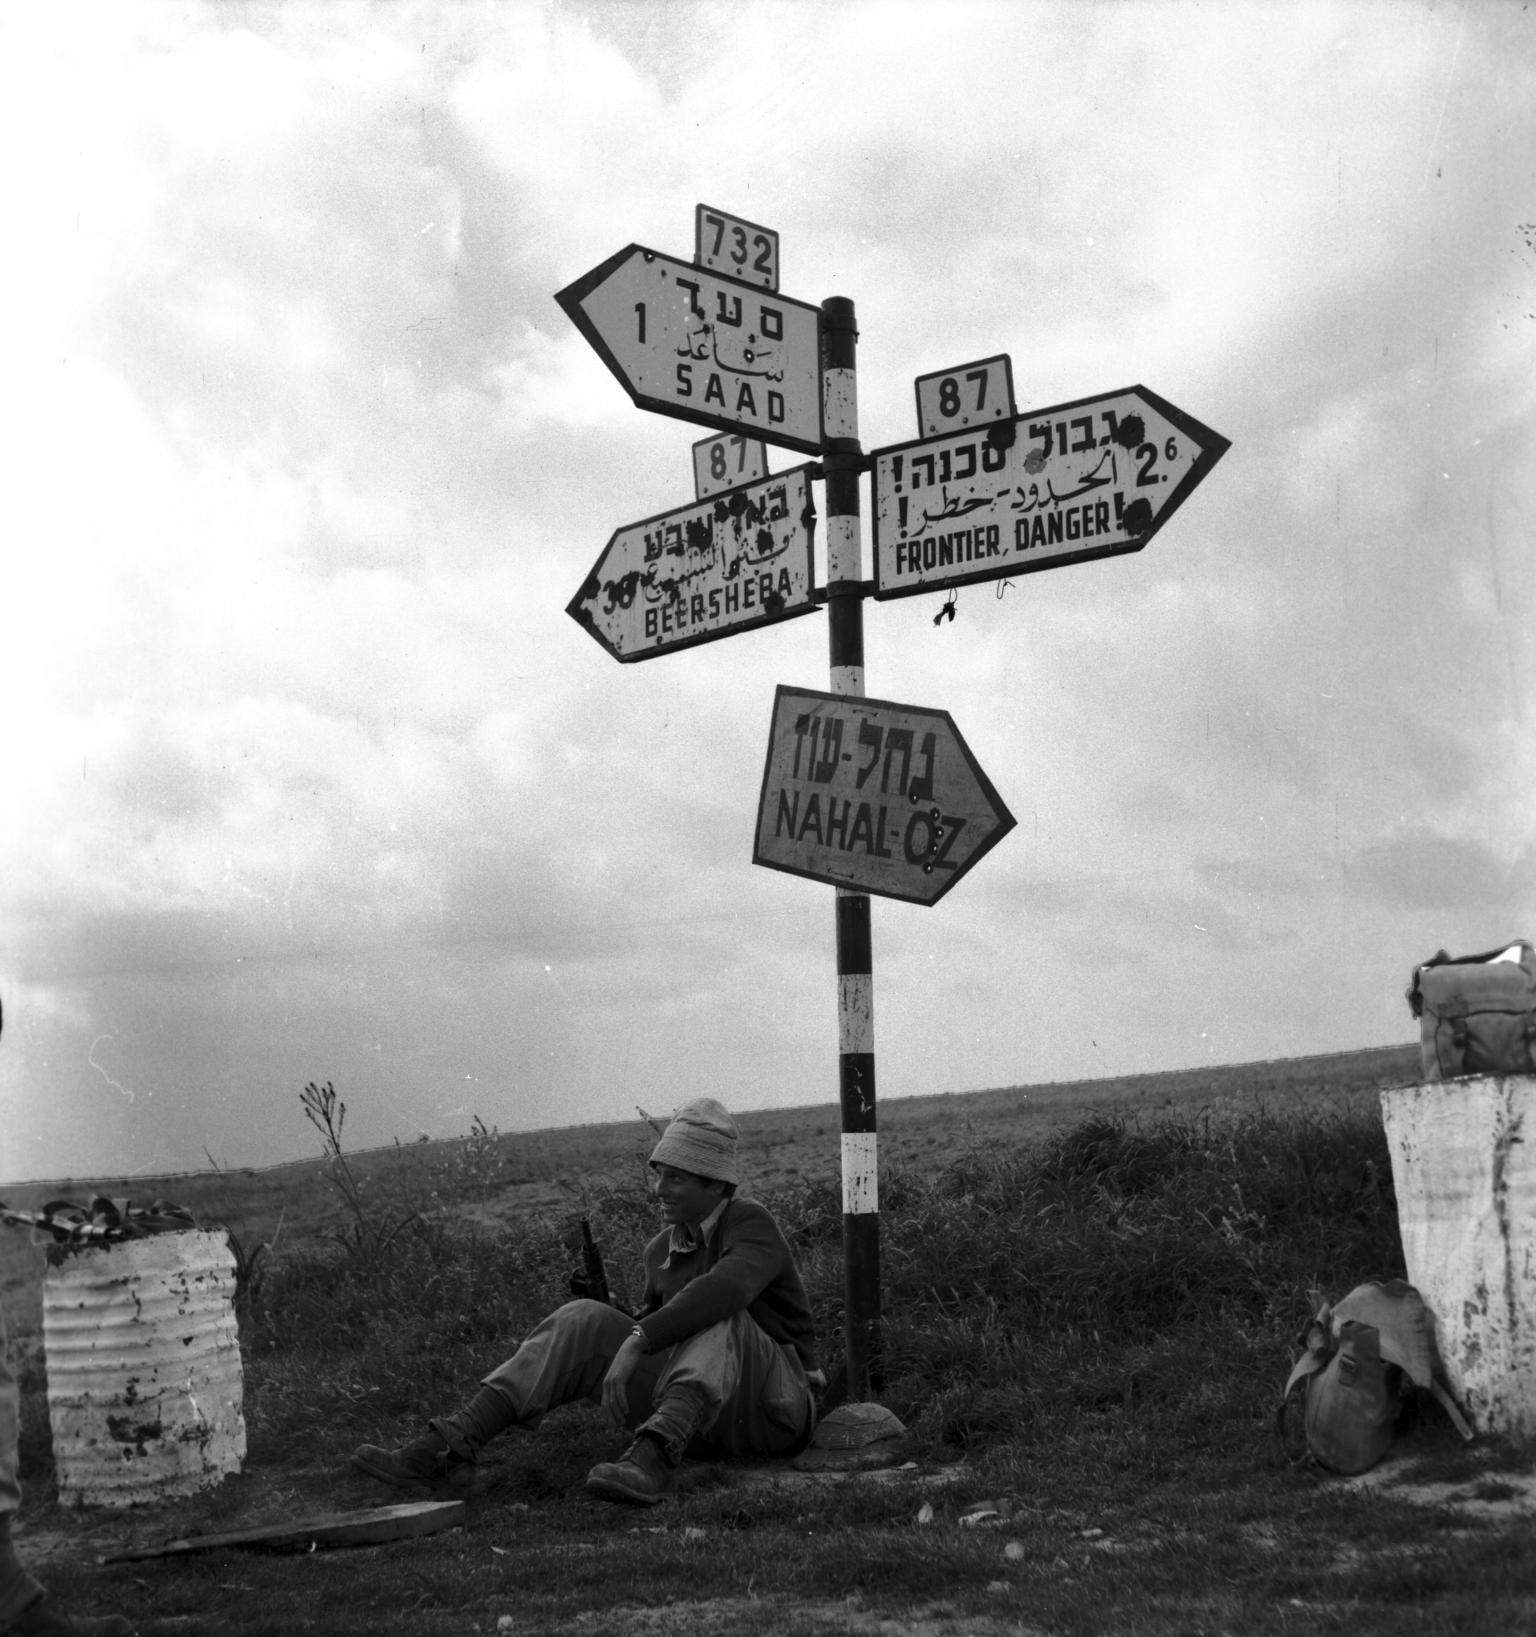 Outdoor photograph of signpost with signs pointing different directions with town names and information in Hebrew, English, and Arabic, and smiling man holding a rifle sitting on the ground beneath the sign.